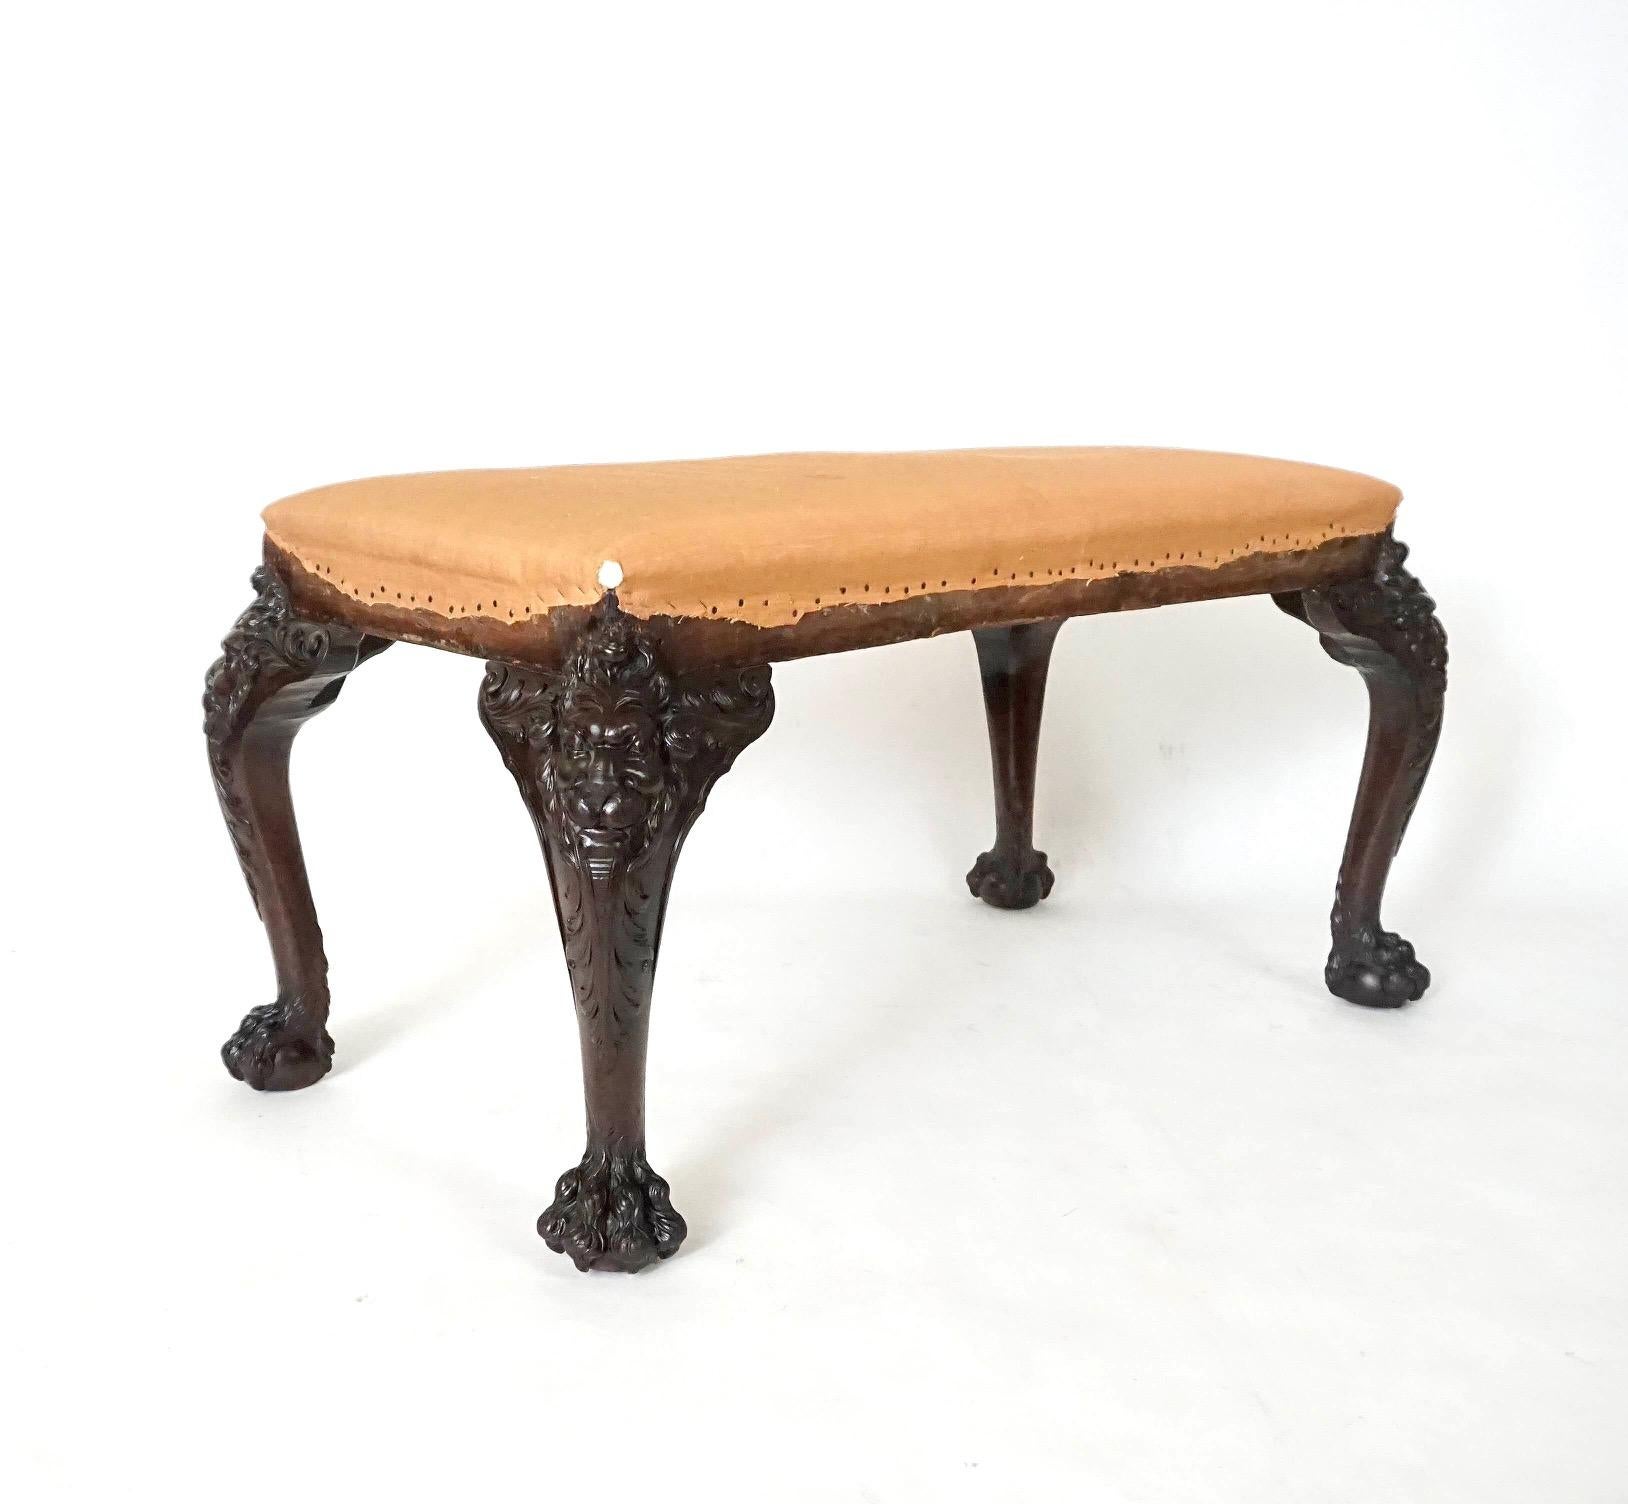 A circa 1890 English George II style long stool or bench commissioned by London dealer Henry Samuel having thickly carved cabriole legs in the manner of Daniel Bell and Thomas Moore with lion masks issuing acanthus leaves on hairy-paw feet. It is